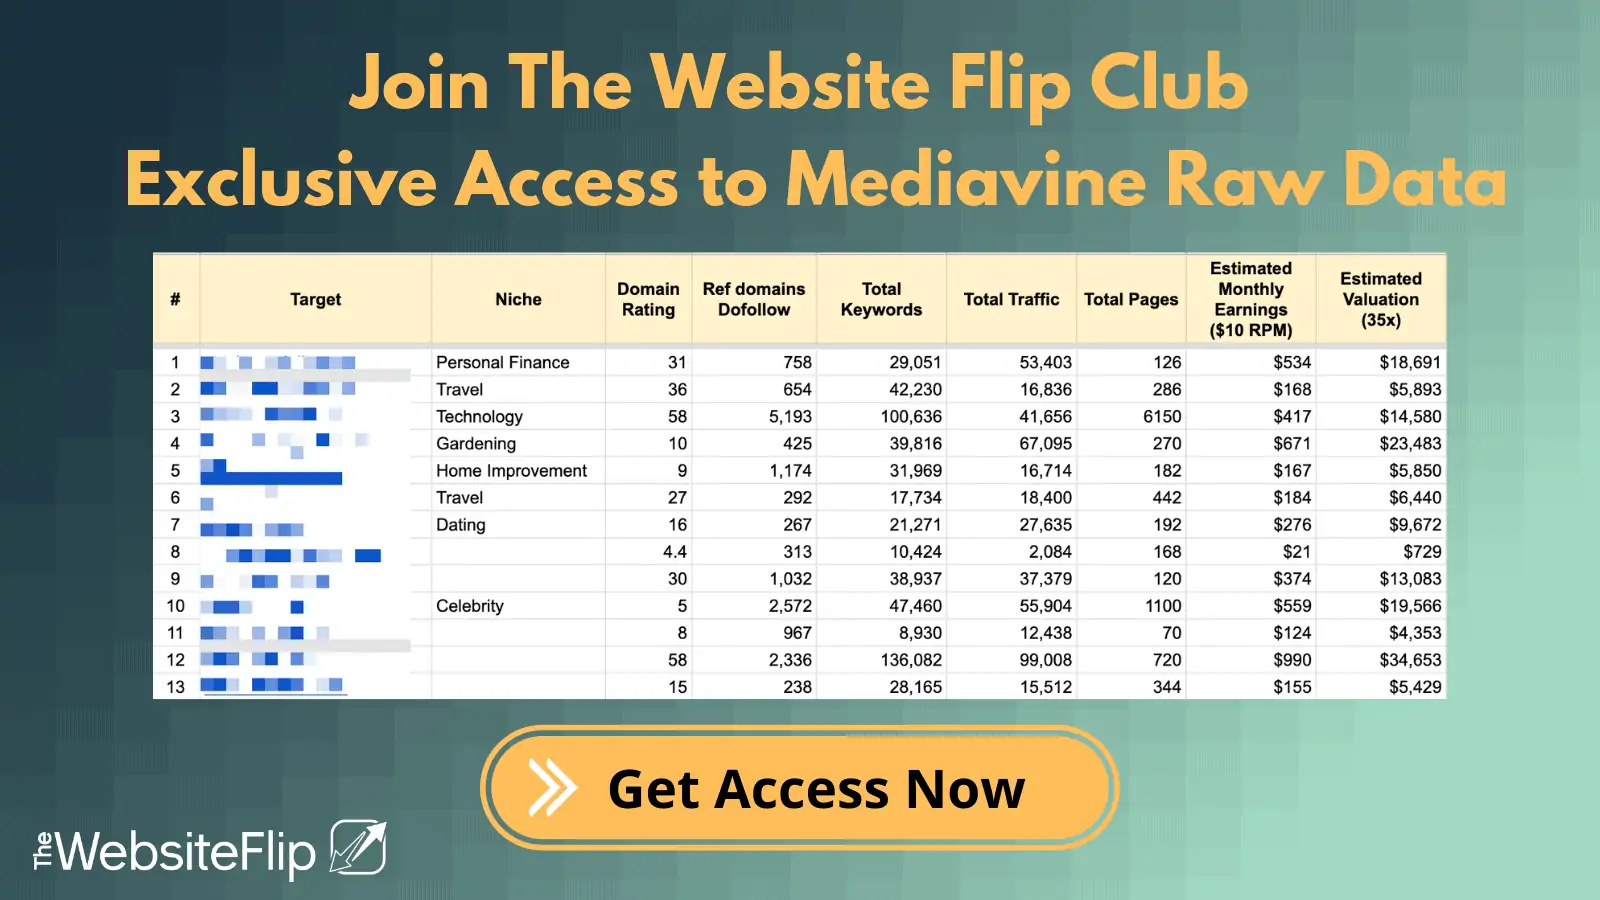 Join the club to get exclusive access